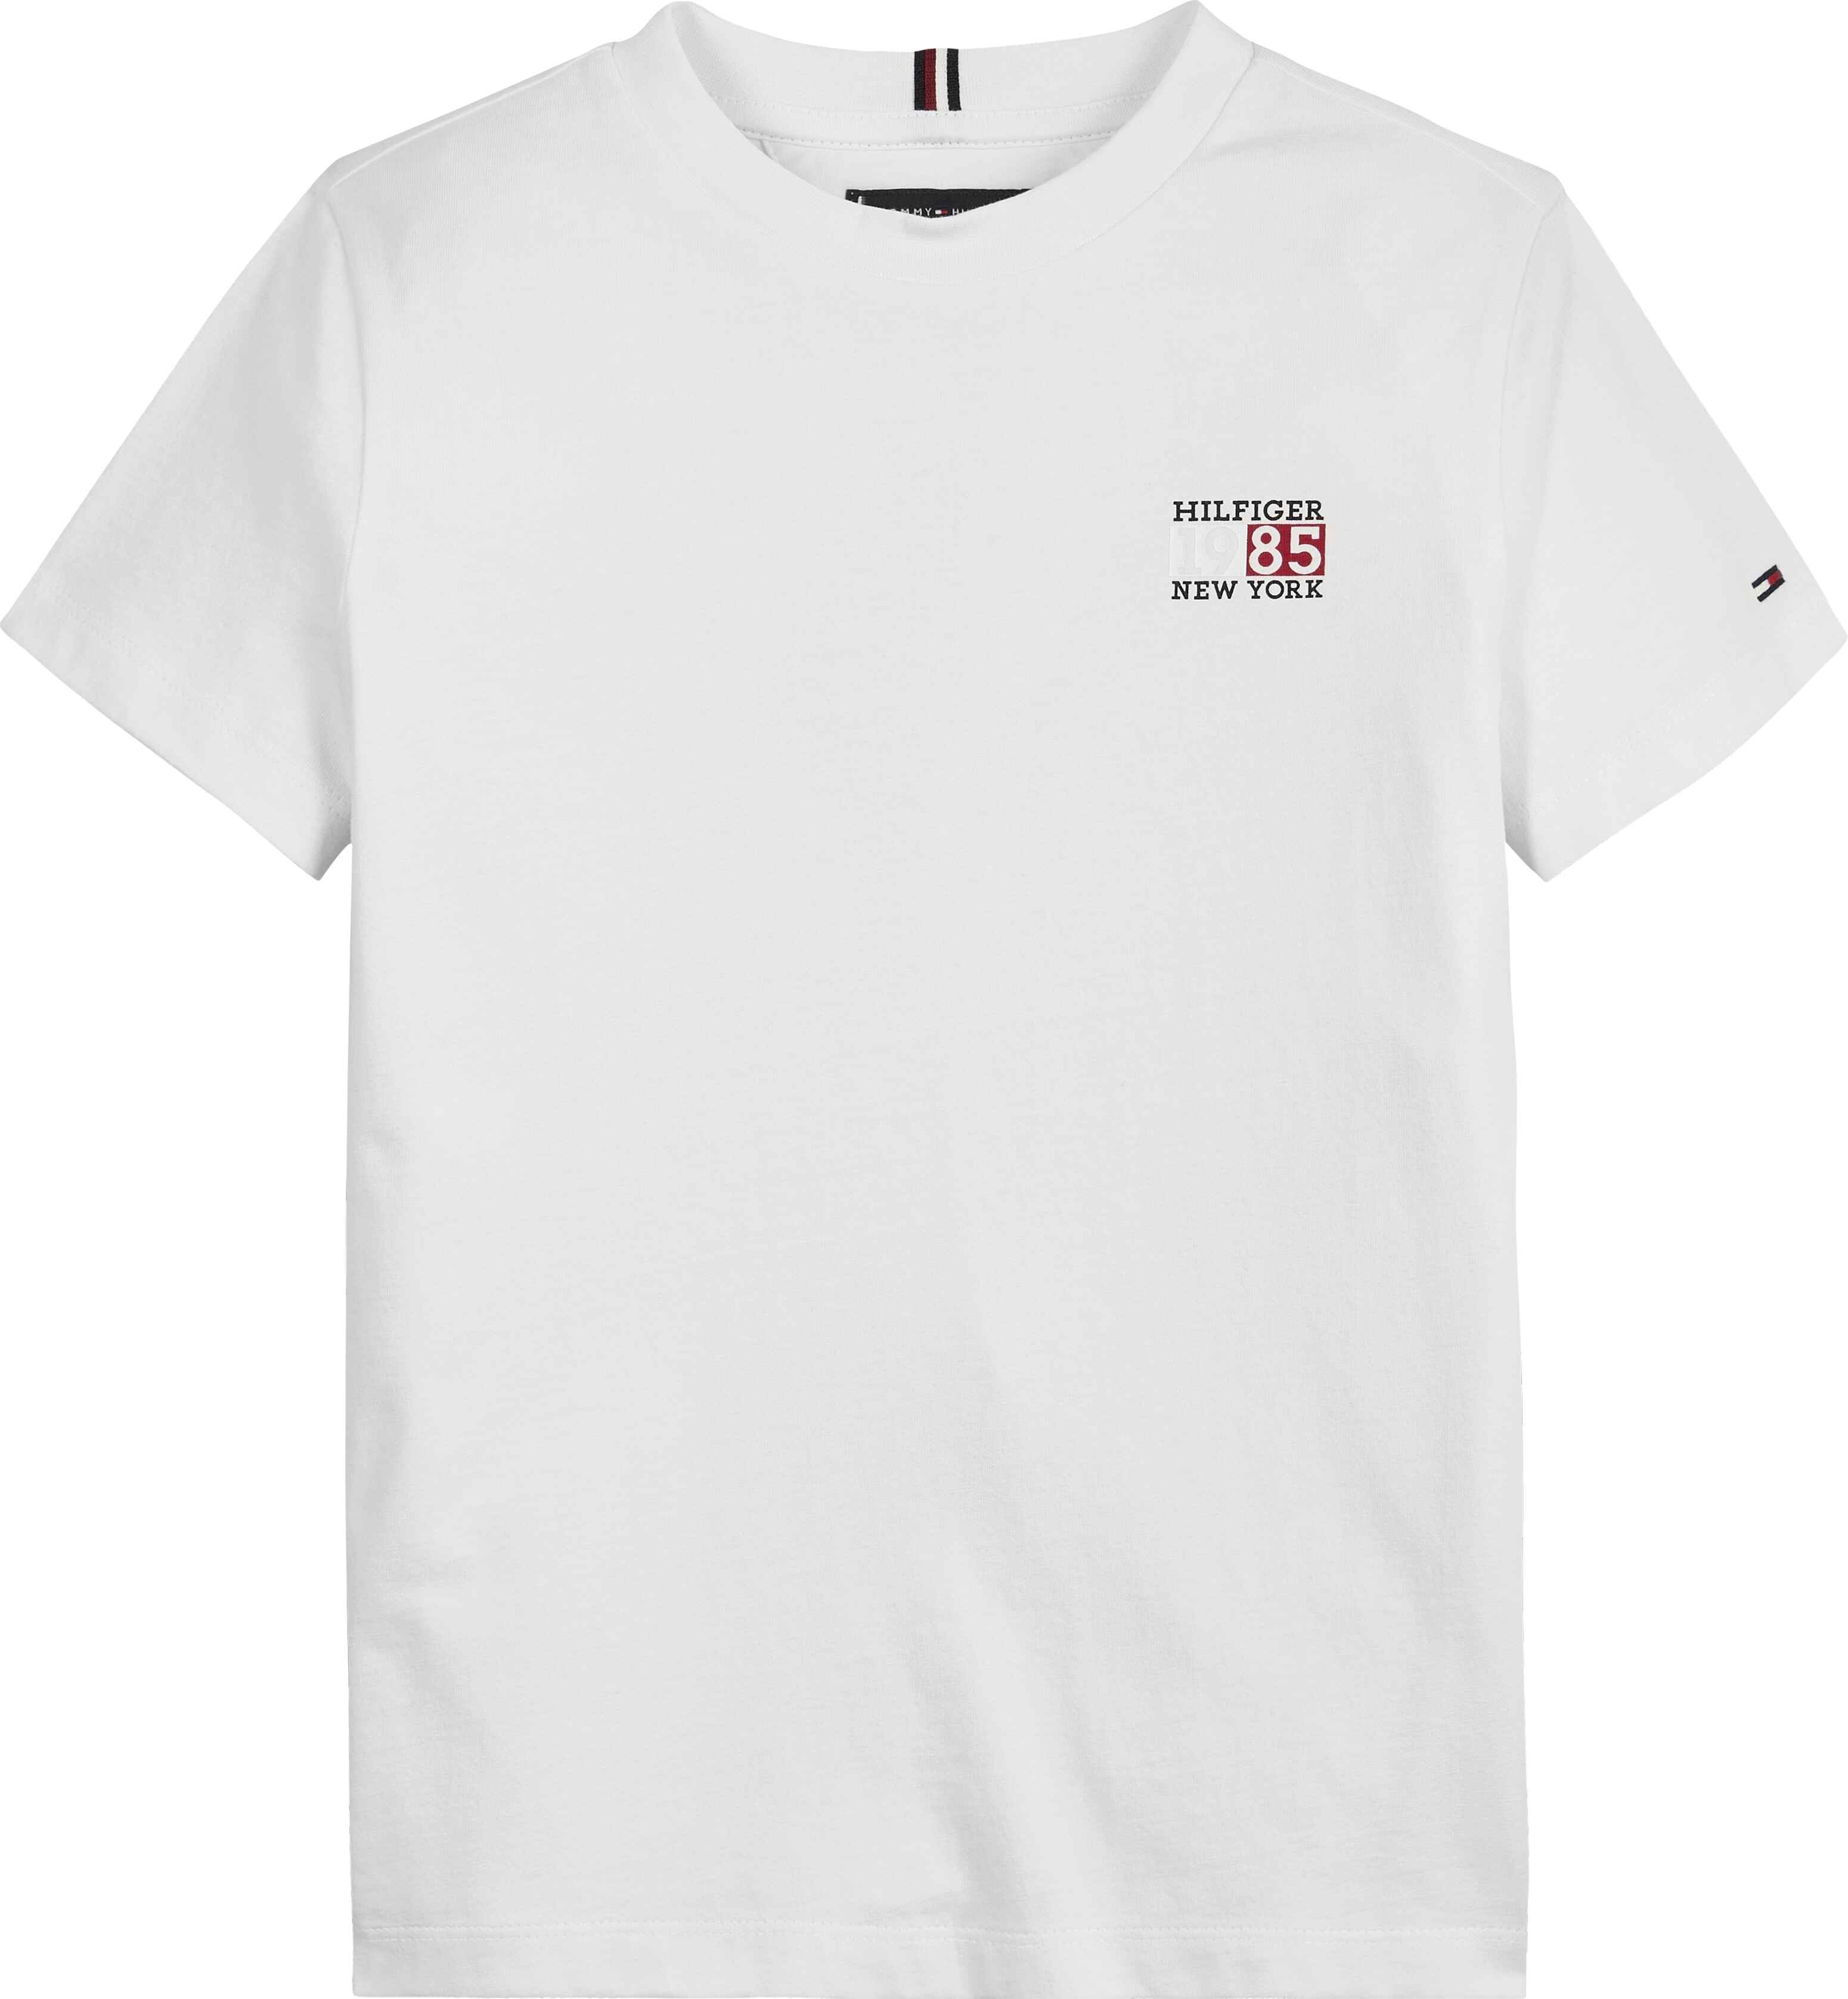 TOMMY HILFIGER - NEW YORK FLAG GRAPHIC TEE S/S - KB0KB08626